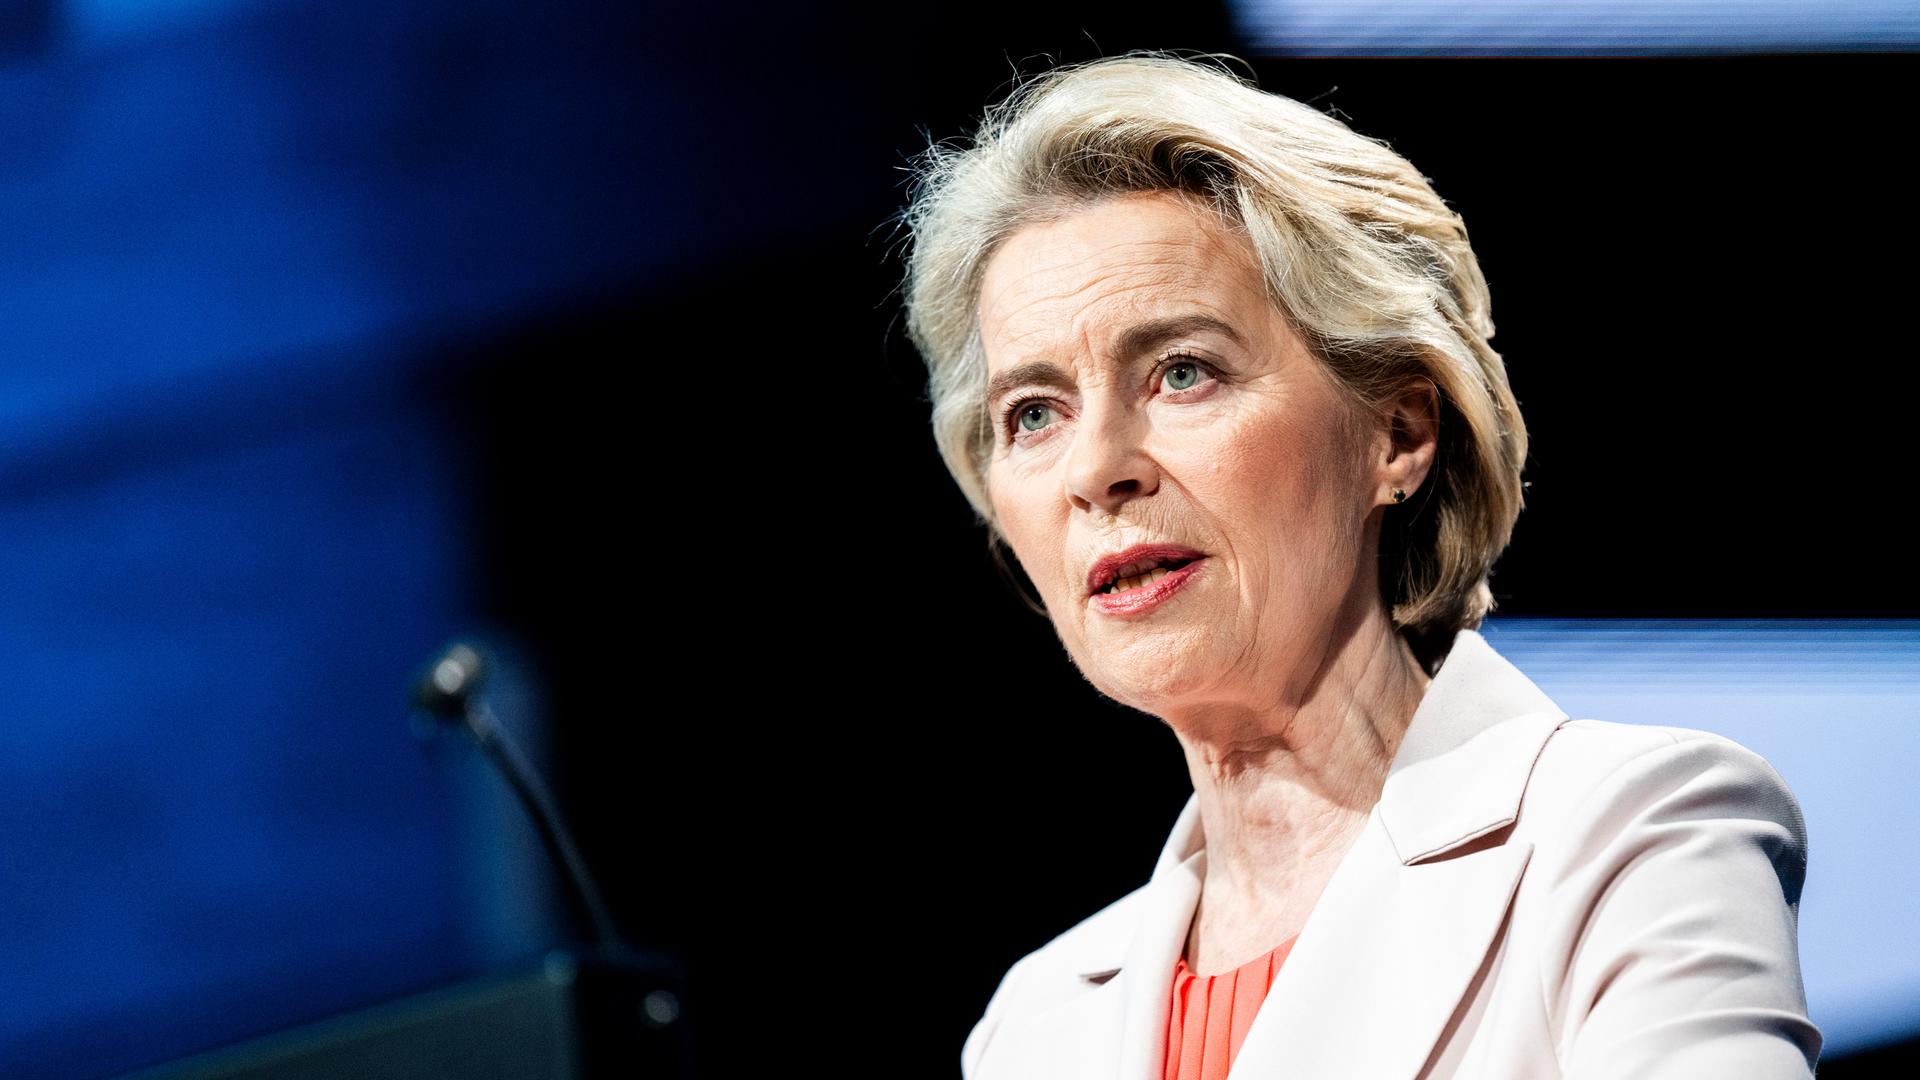 Interview of the week – Von der Leyen sets terms for cooperation with MPs from right-wing parties